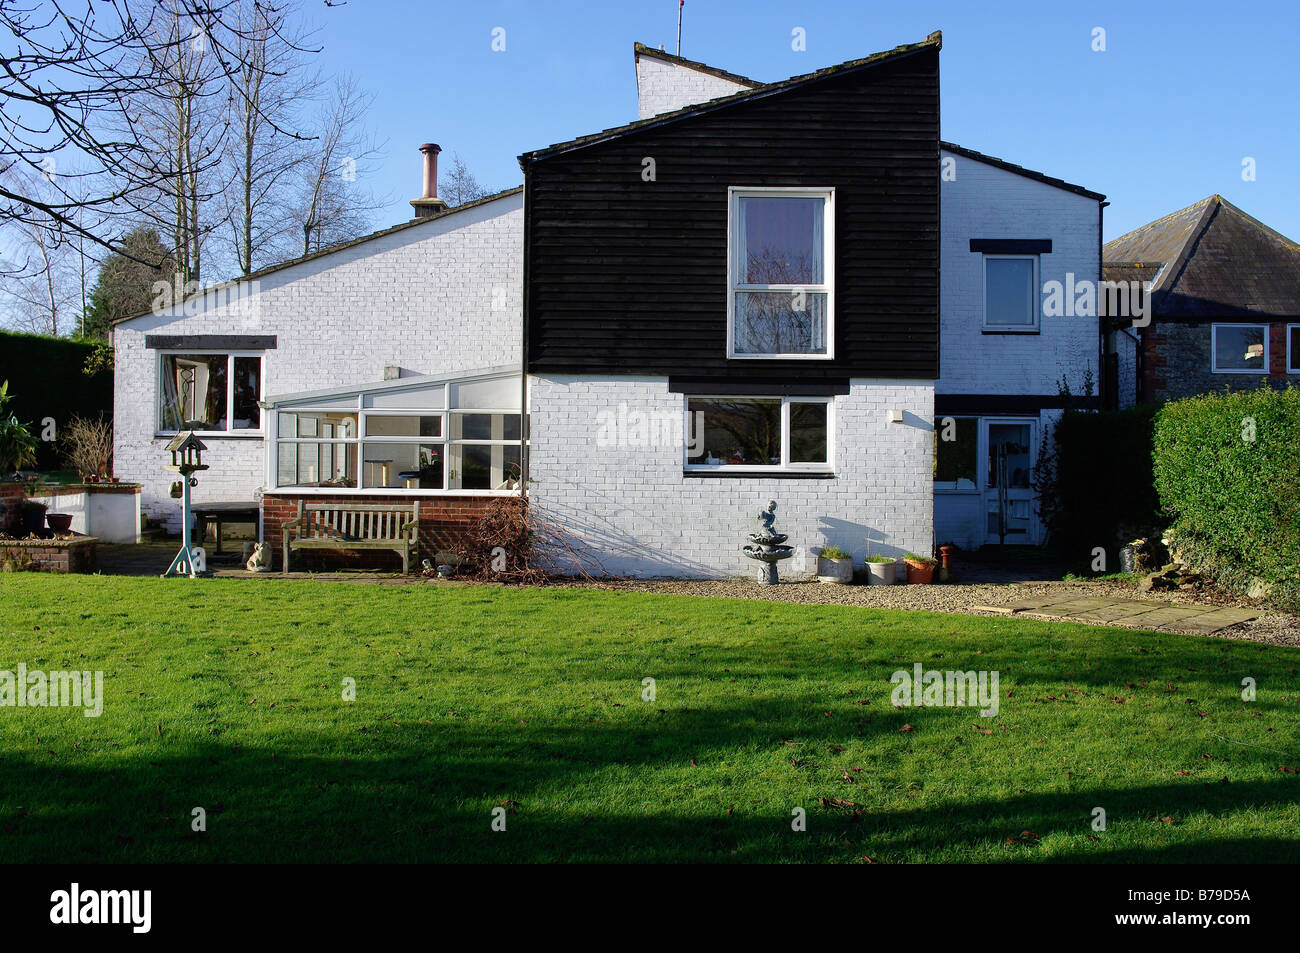 Black And White Brick And Timber House Built In 1970s In Uk Stock Photo Alamy